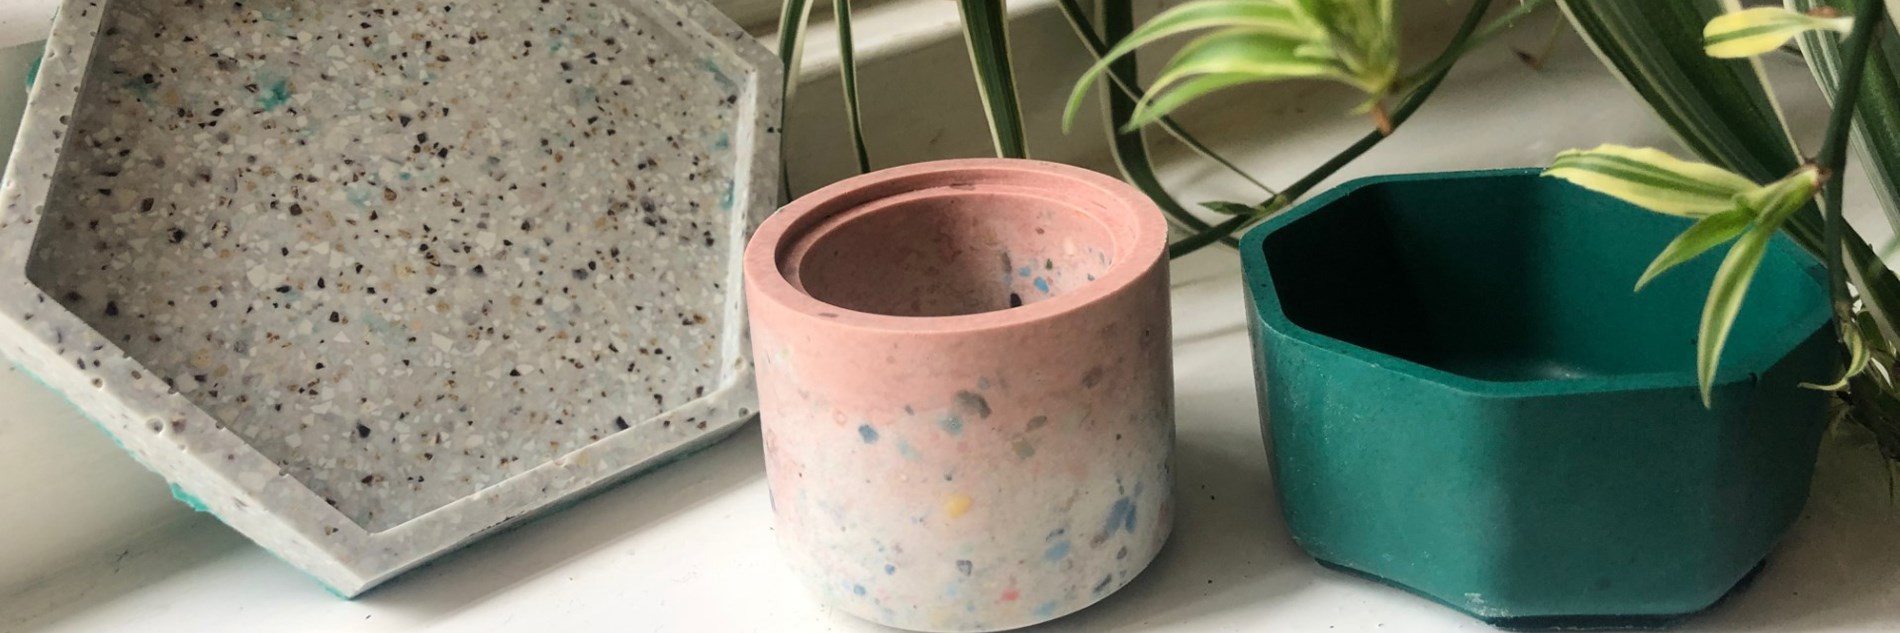 Three plant pots lined up on a windowsill with a houseplant partially visible in the top left corner. From left to right, a grey hexagonal plant pot saucer, a pink and white cylindrical plant pot and a green hexagonal plant pot. 